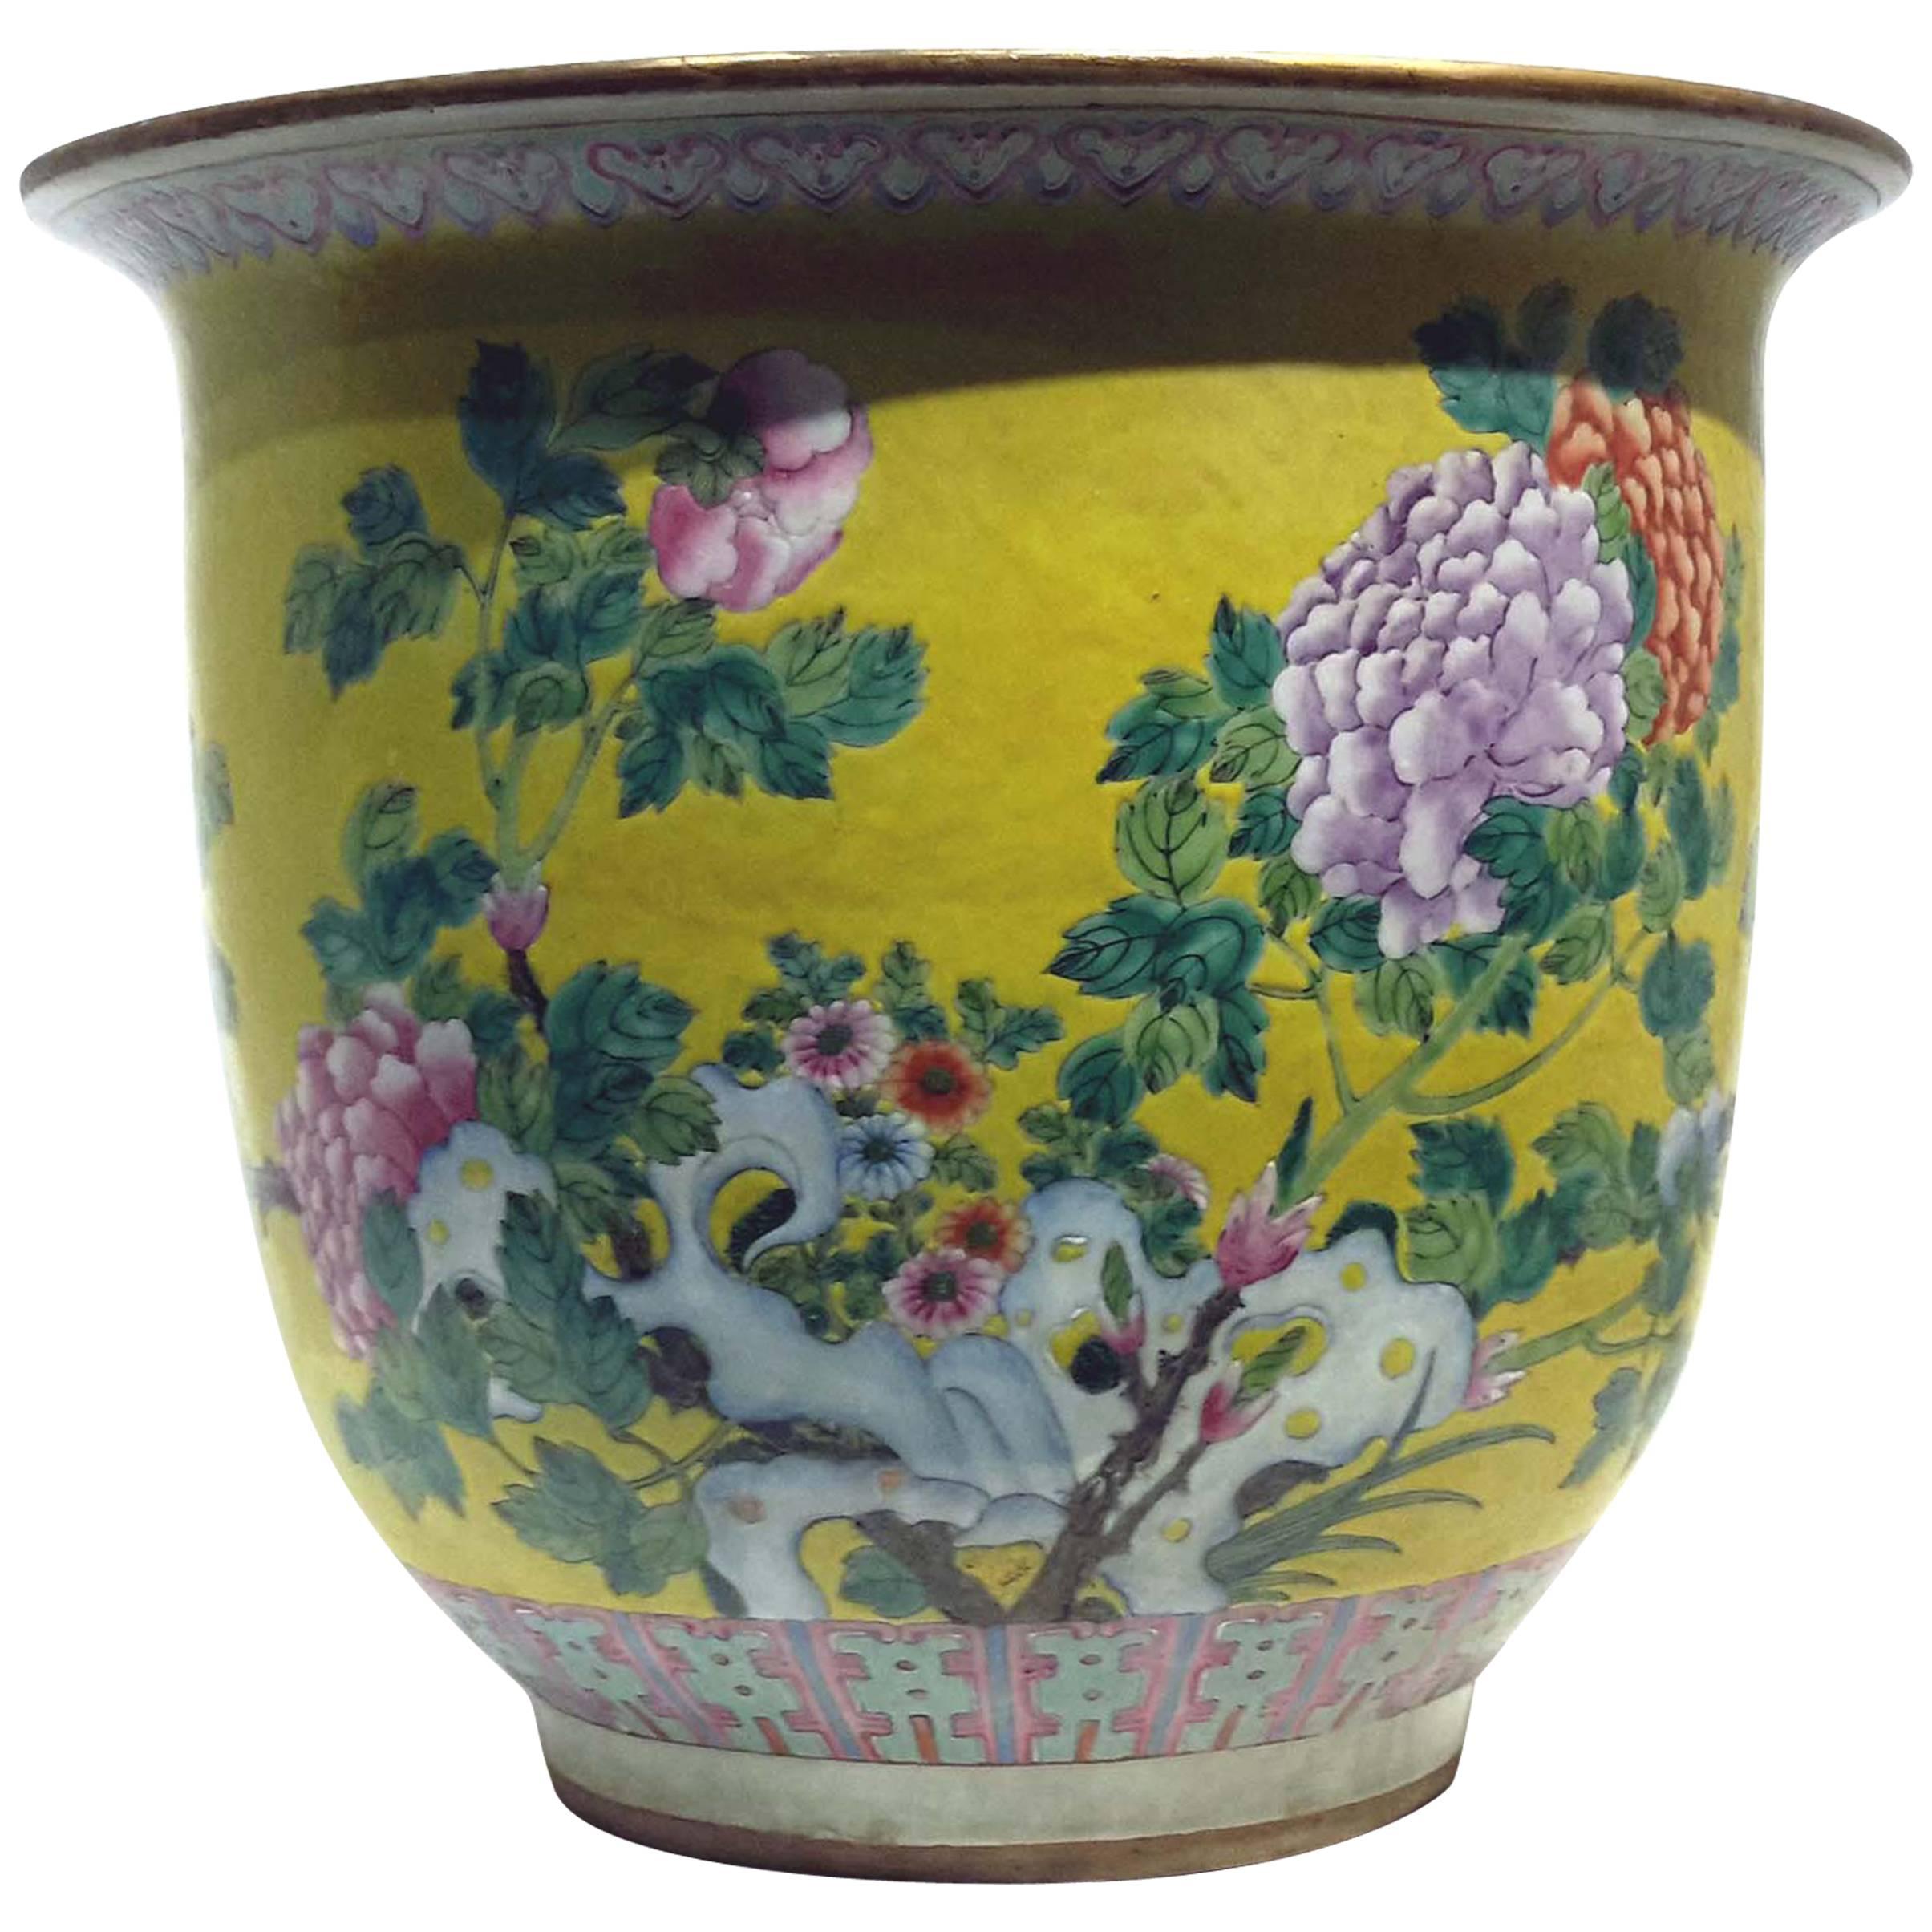 Large Qing Dynasty Chinese Famille Rose Porcelain Planter. 19th Century